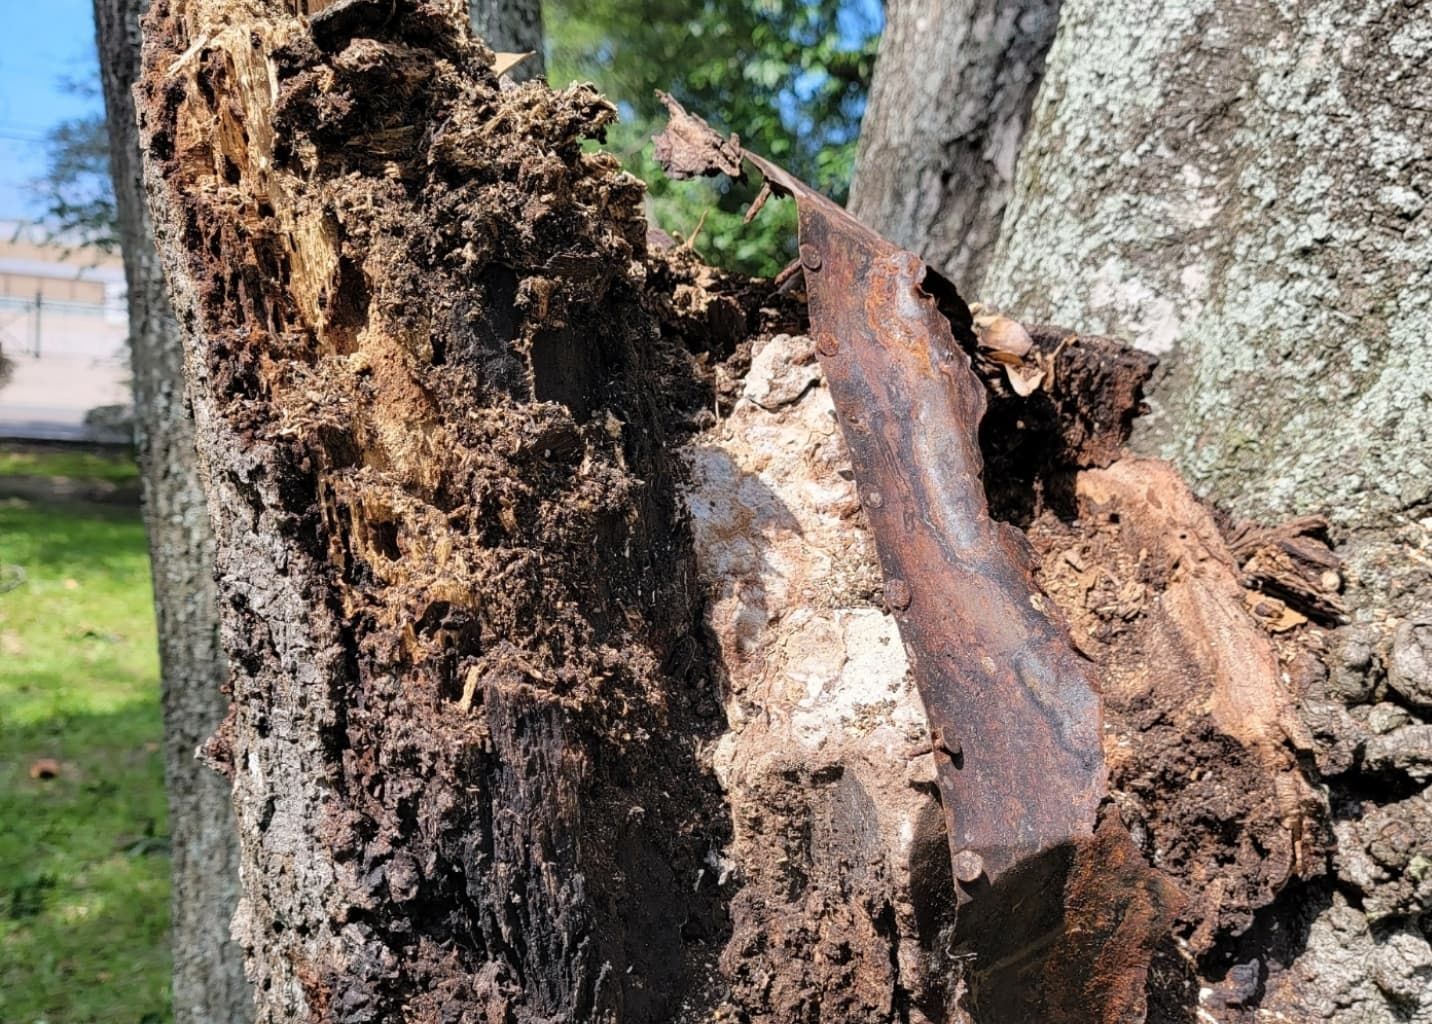 Tree treatment for a oak tree with tree pests